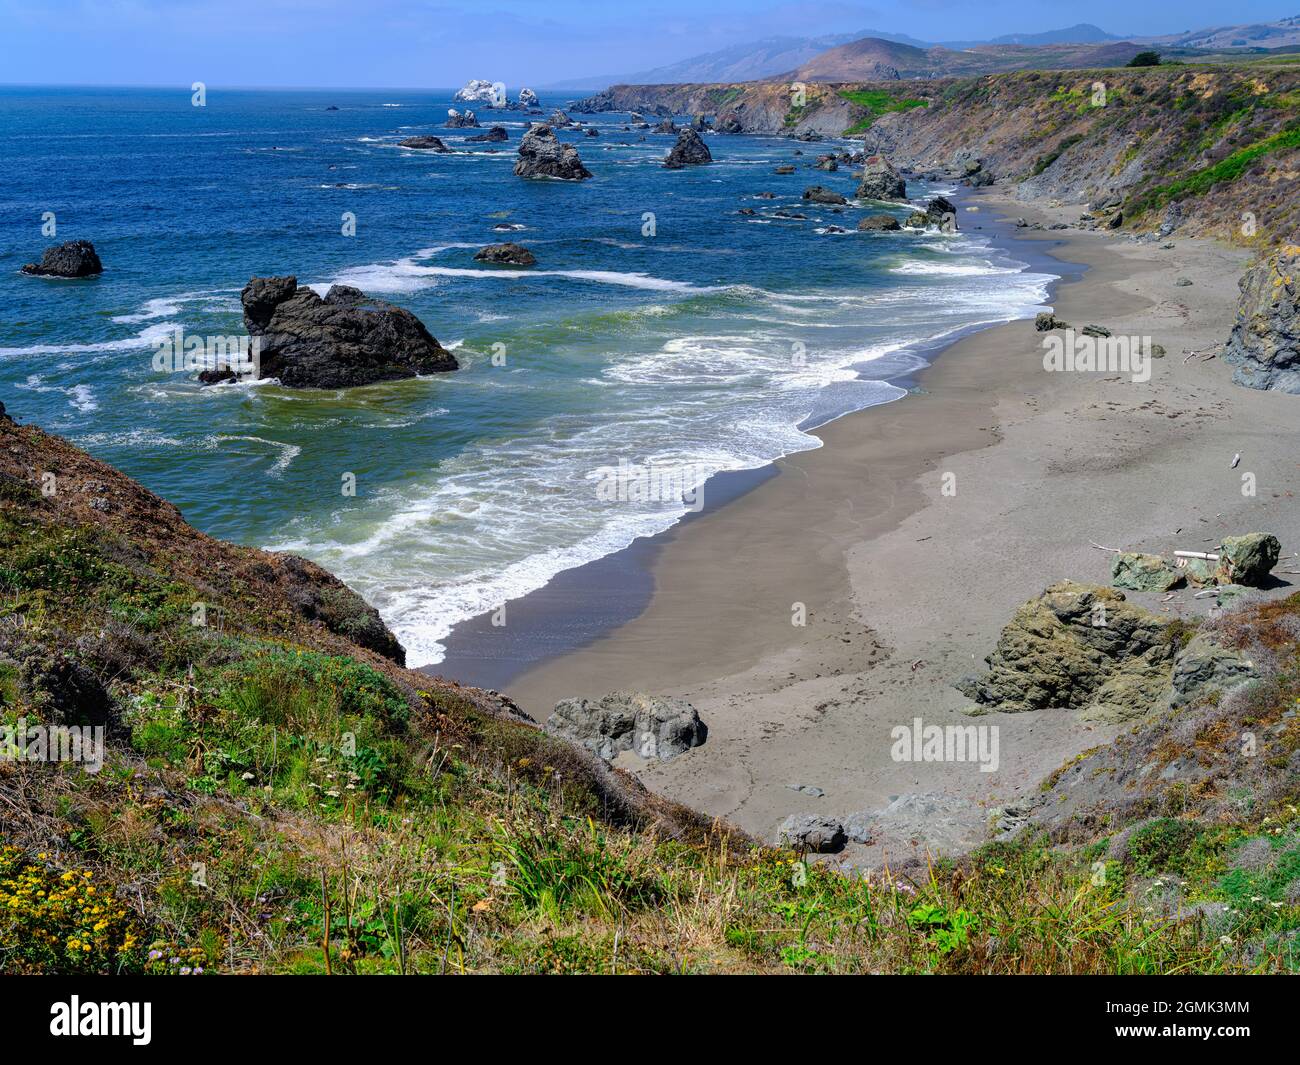 This is the Bodega Bay Area, miles and miles of quiet beaches with a rugged and beautiful appeal. Stock Photo